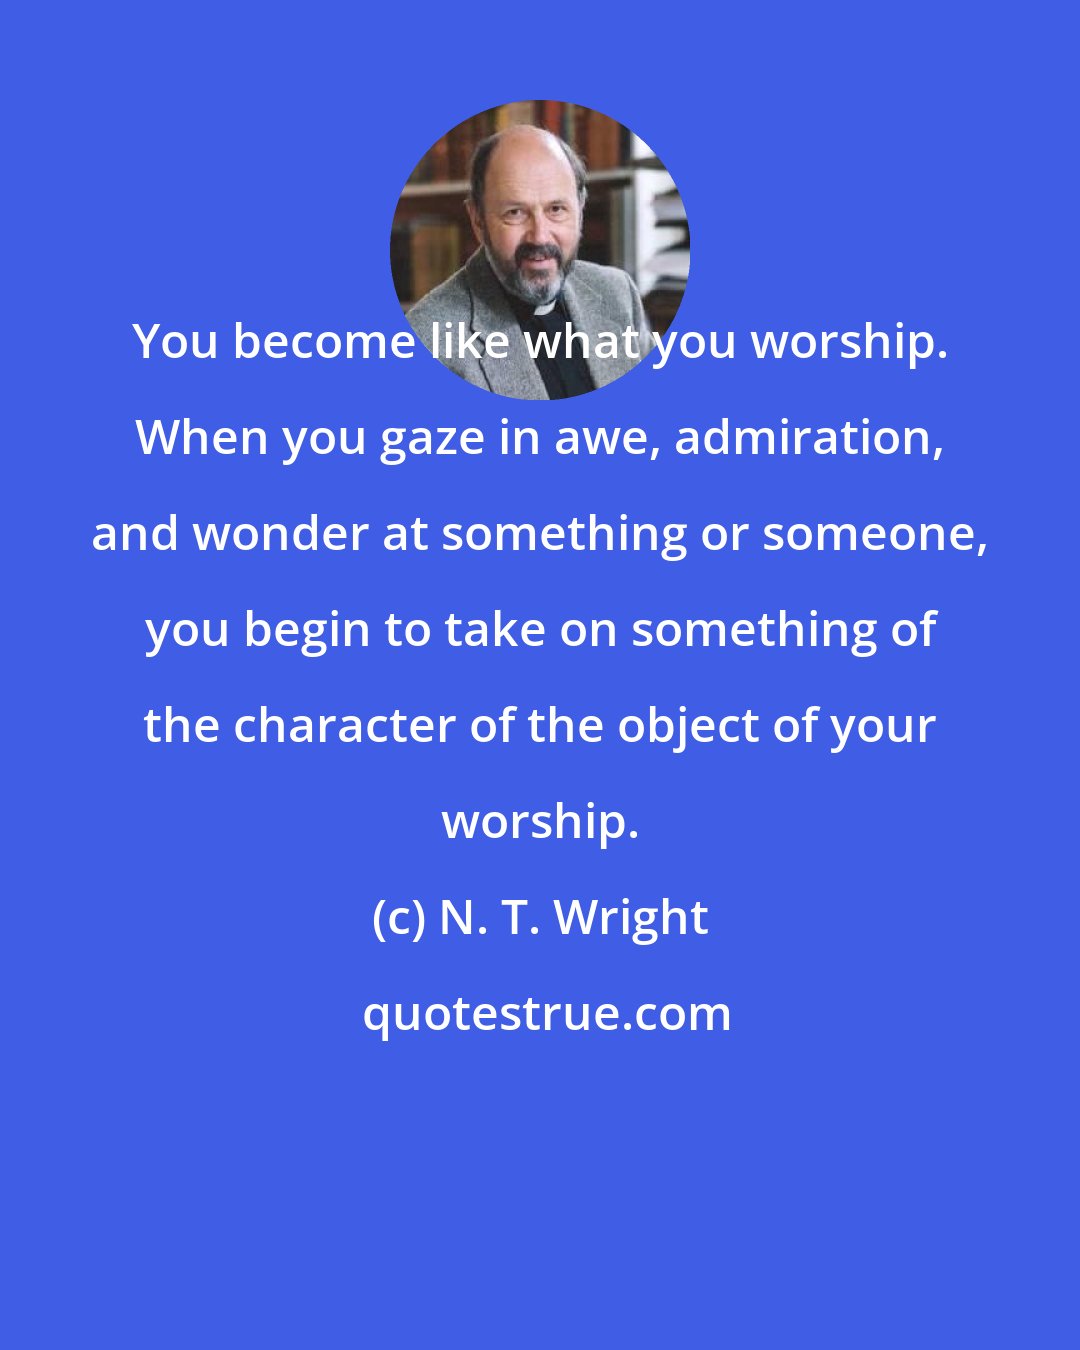 N. T. Wright: You become like what you worship. When you gaze in awe, admiration, and wonder at something or someone, you begin to take on something of the character of the object of your worship.